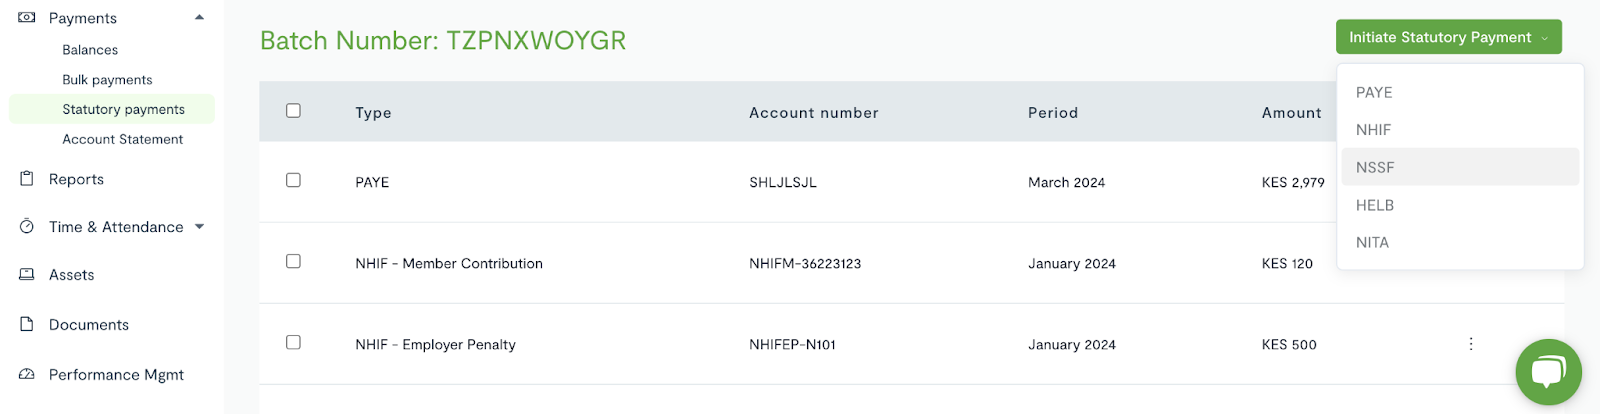 NSSF payment